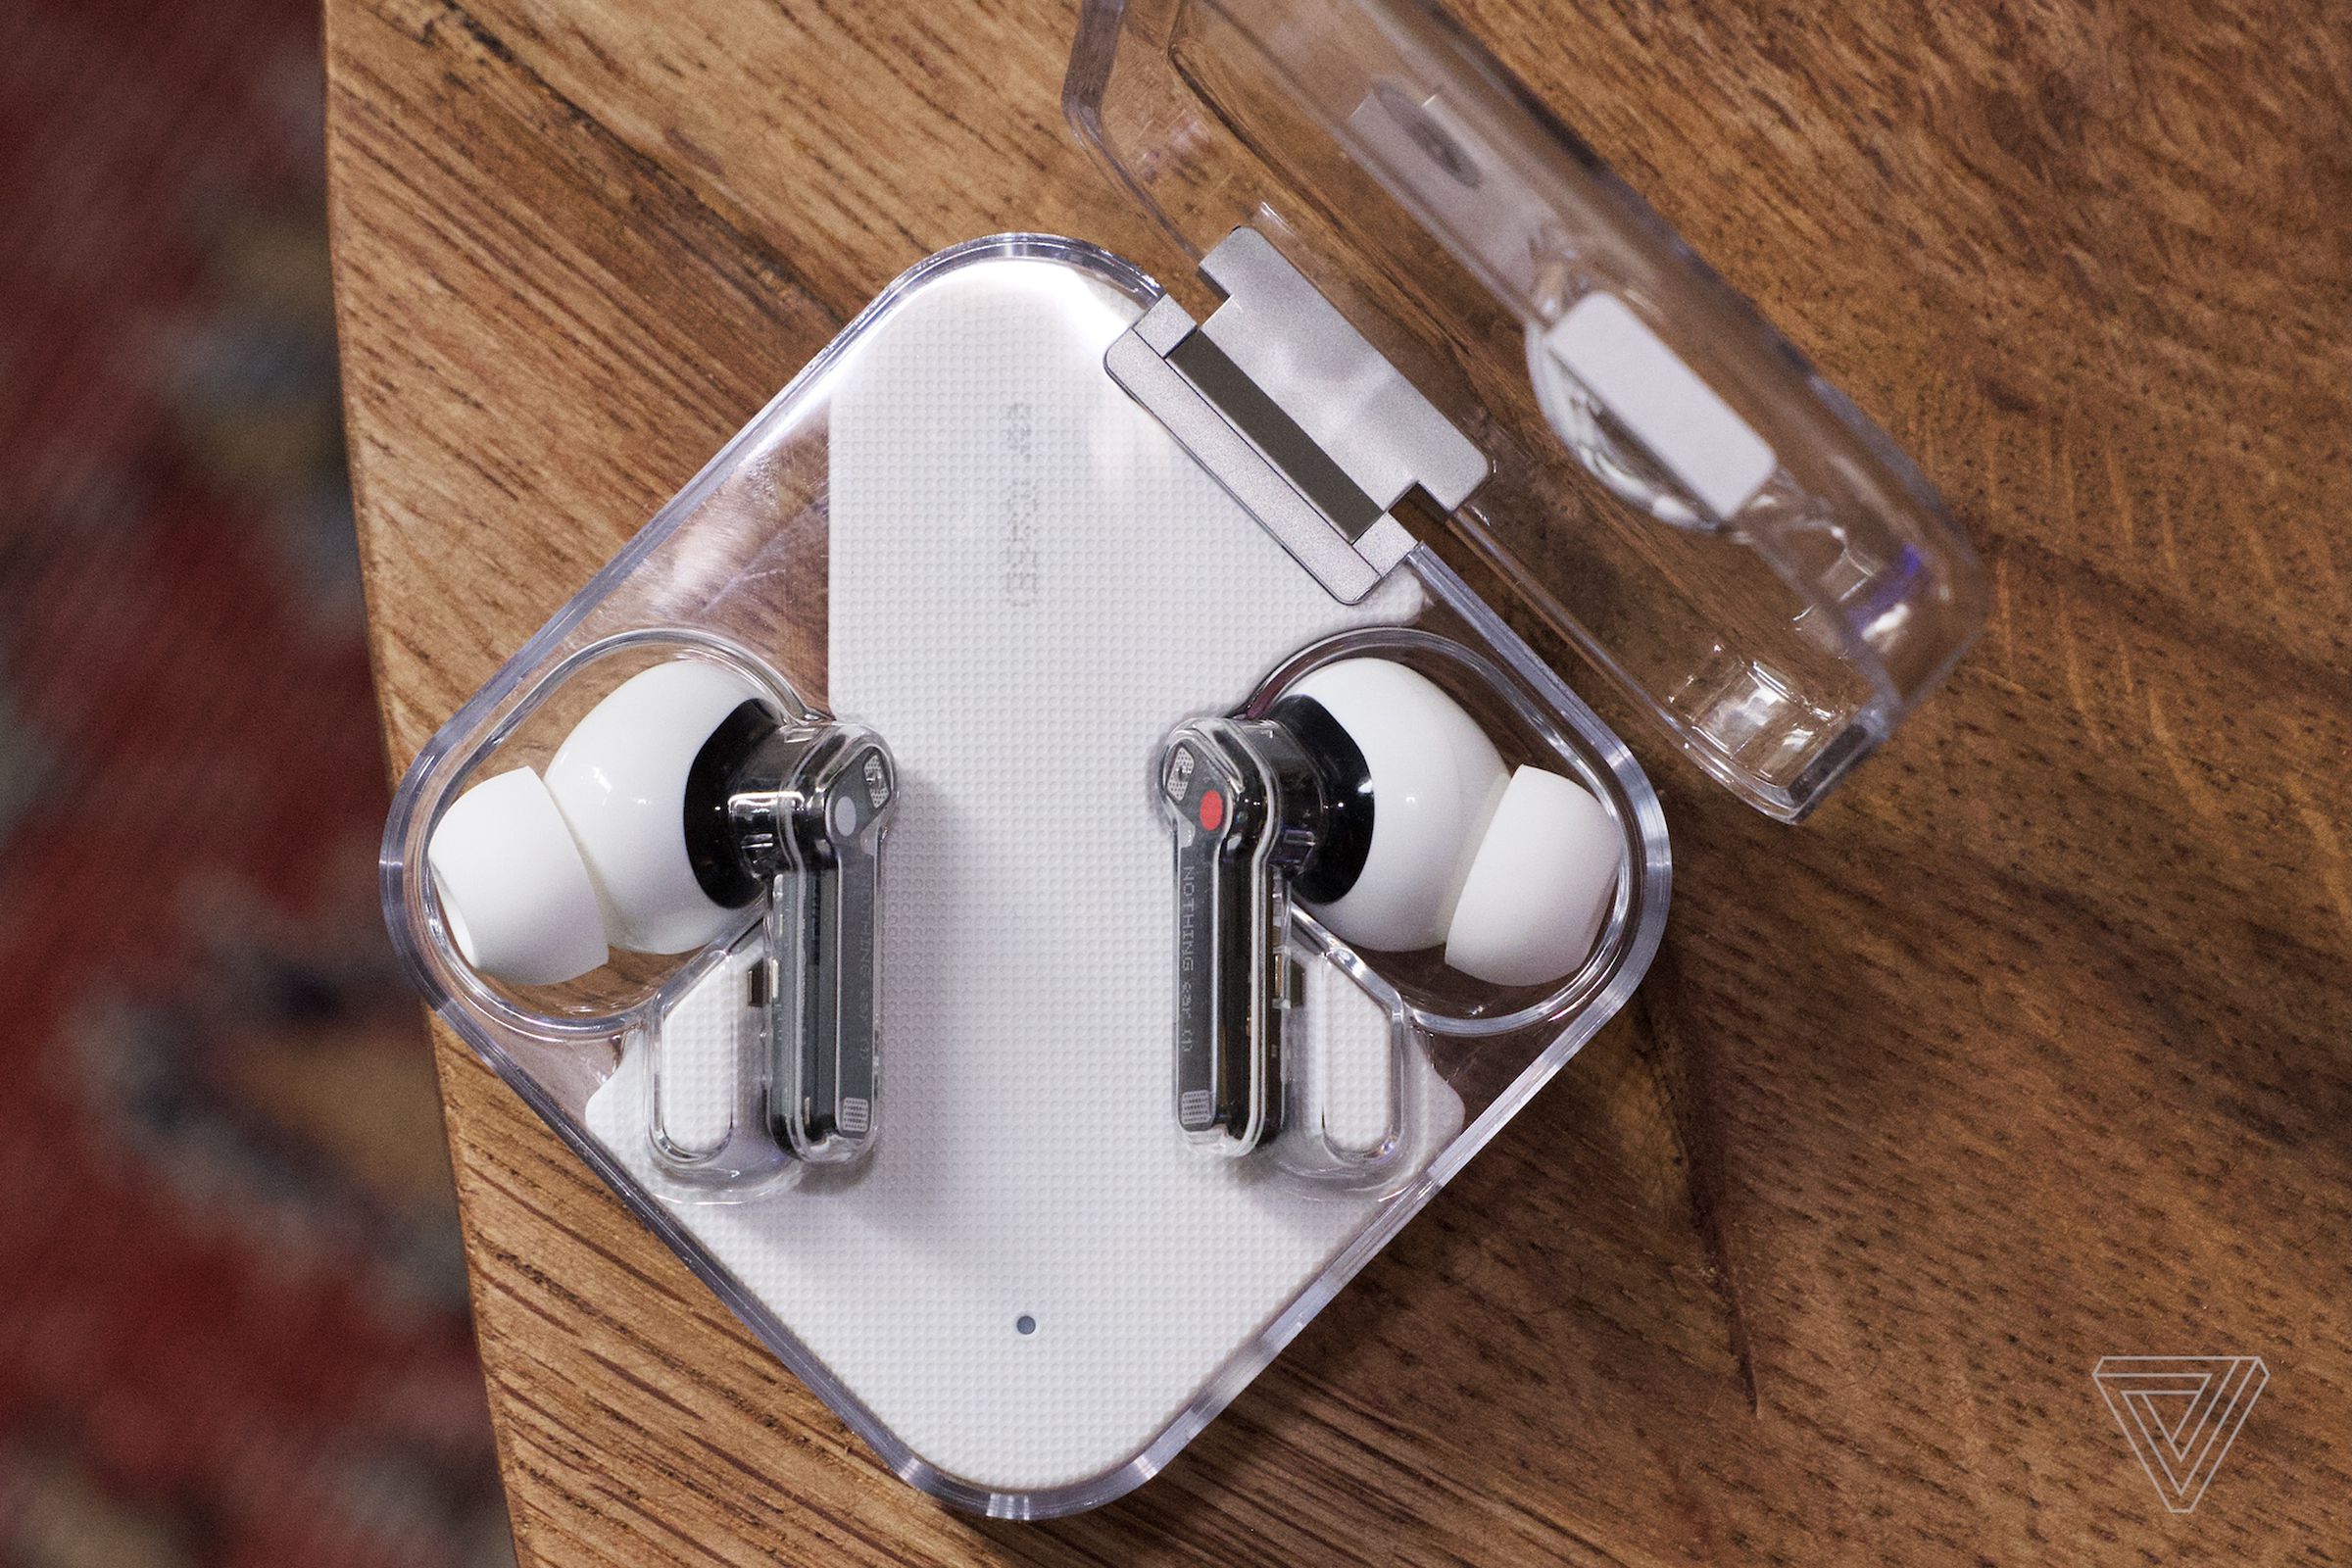 The earbuds lay flat in the charging case.